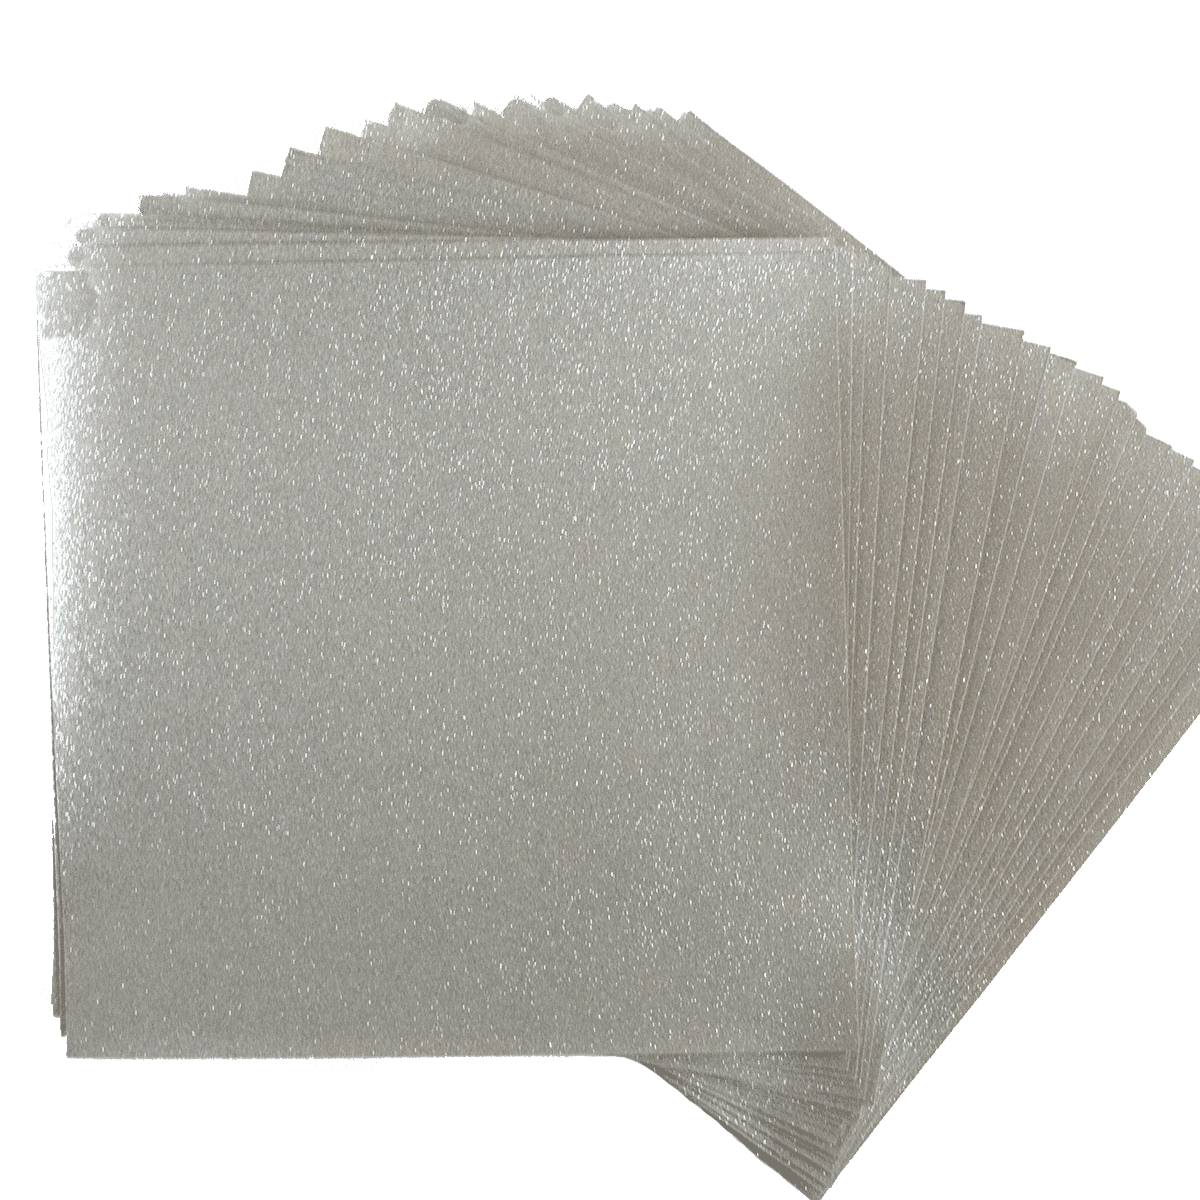 a stack of silver glitter paper on a white background.